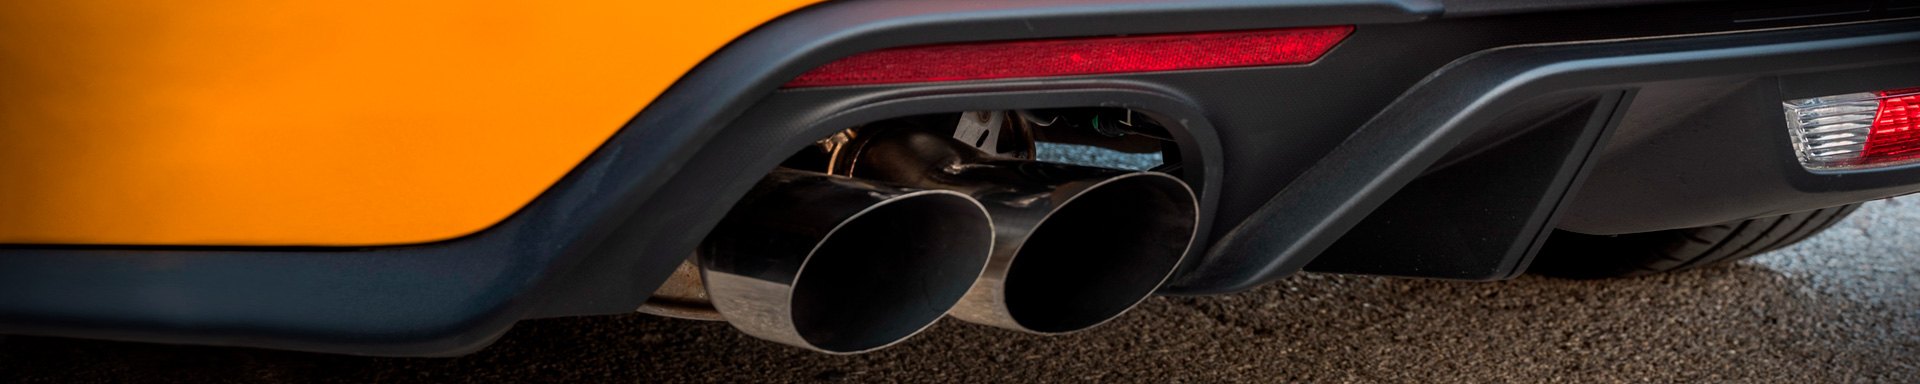 Achieve The Next Level Of Performance With New Roush Exhaust For 2018-2020 Mustang